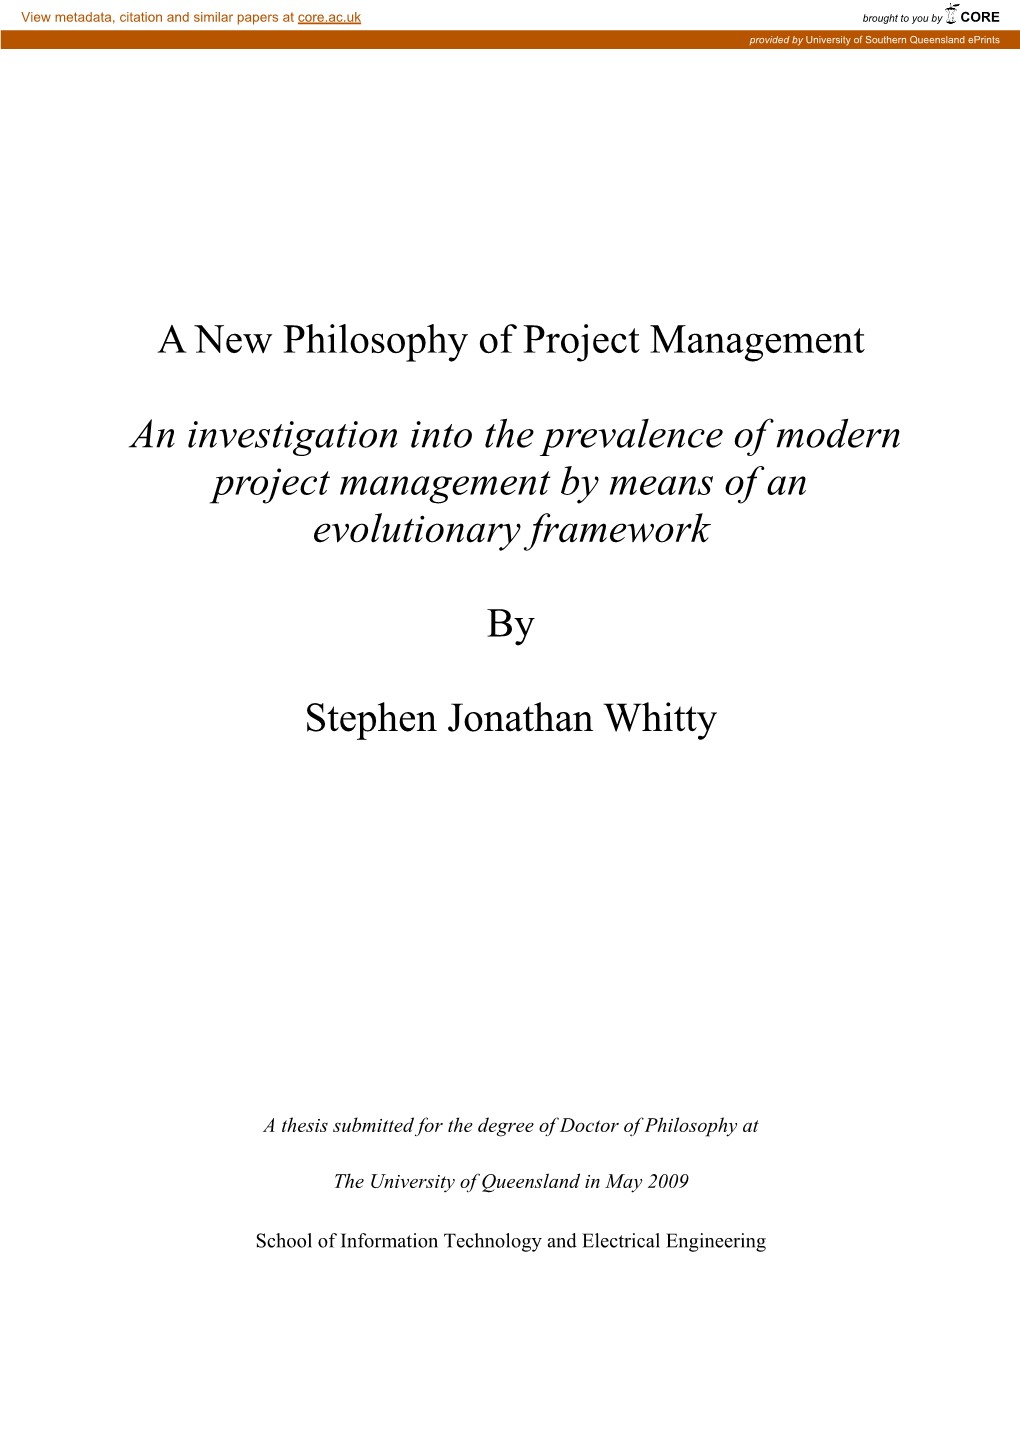 An Investigation Into the Prevalence of Modern Project Management by Means of an Evolutionary Framework